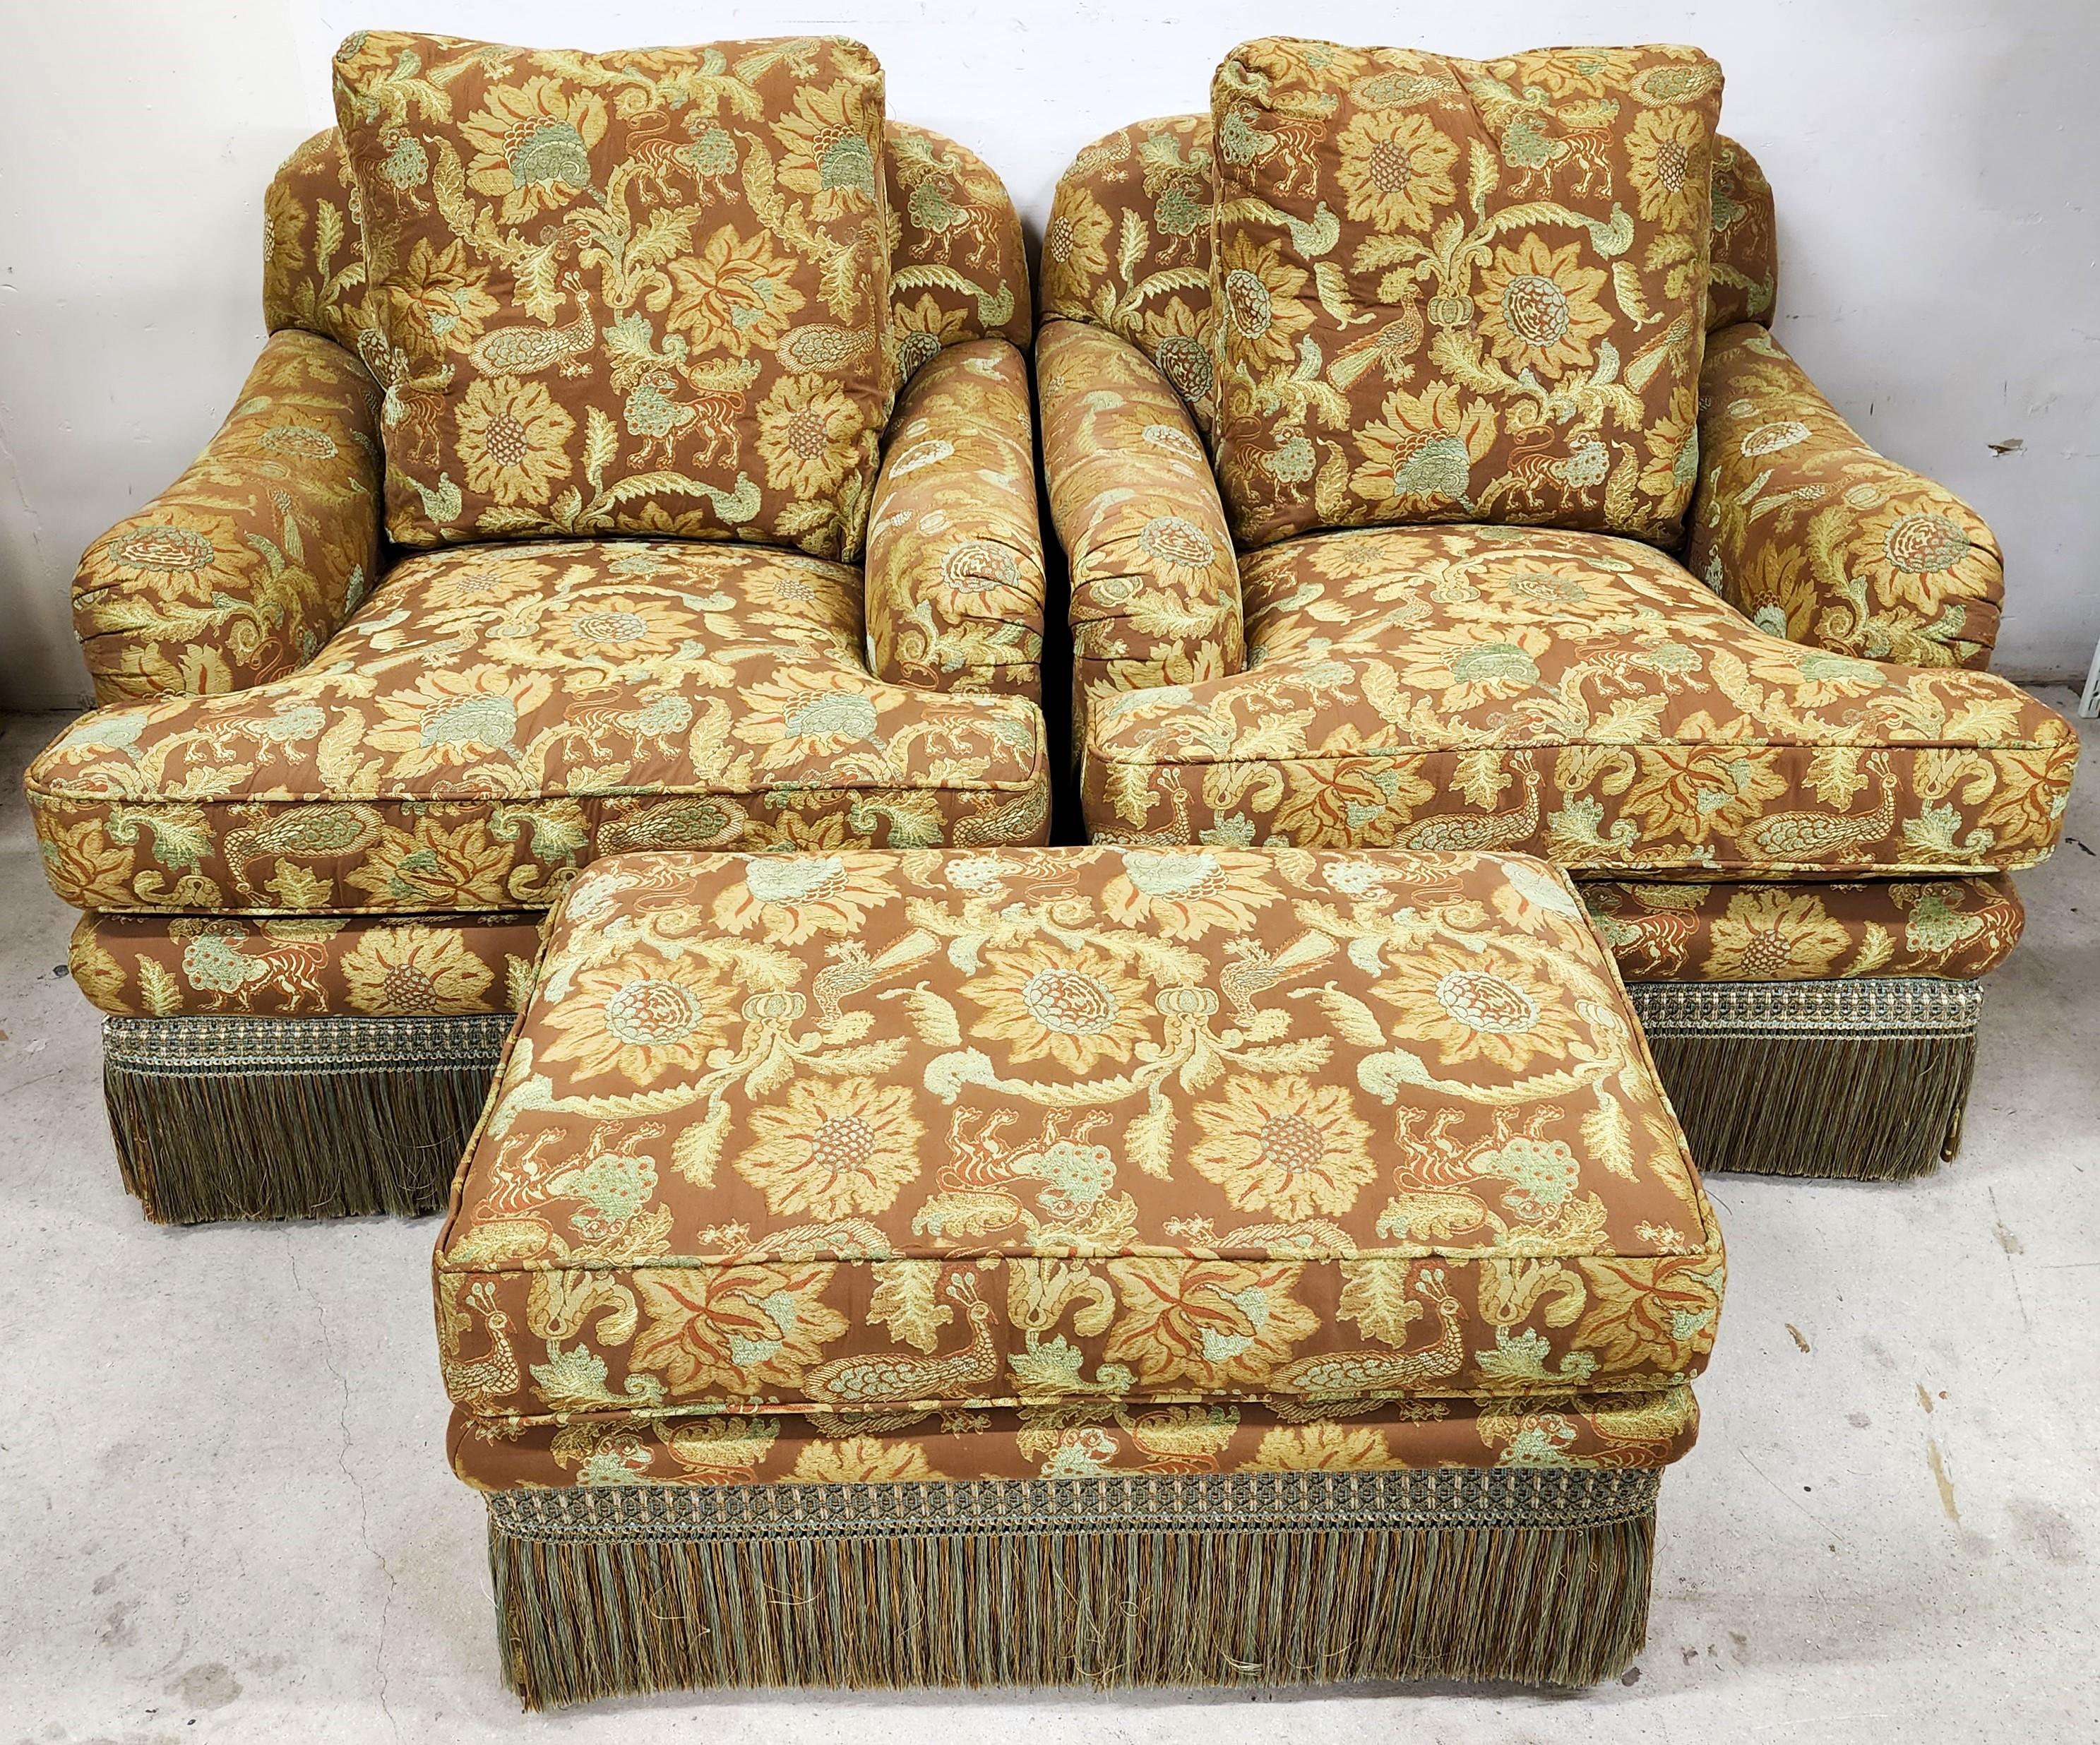 For FULL item description click on CONTINUE READING at the bottom of this page.

Offering One Of Our Recent Palm Beach Estate Fine Furniture Acquisitions Of A

Set of Lounge Chairs & Ottoman by Erwin Lambeth for Tomlinson
Asian chinoiserie themed